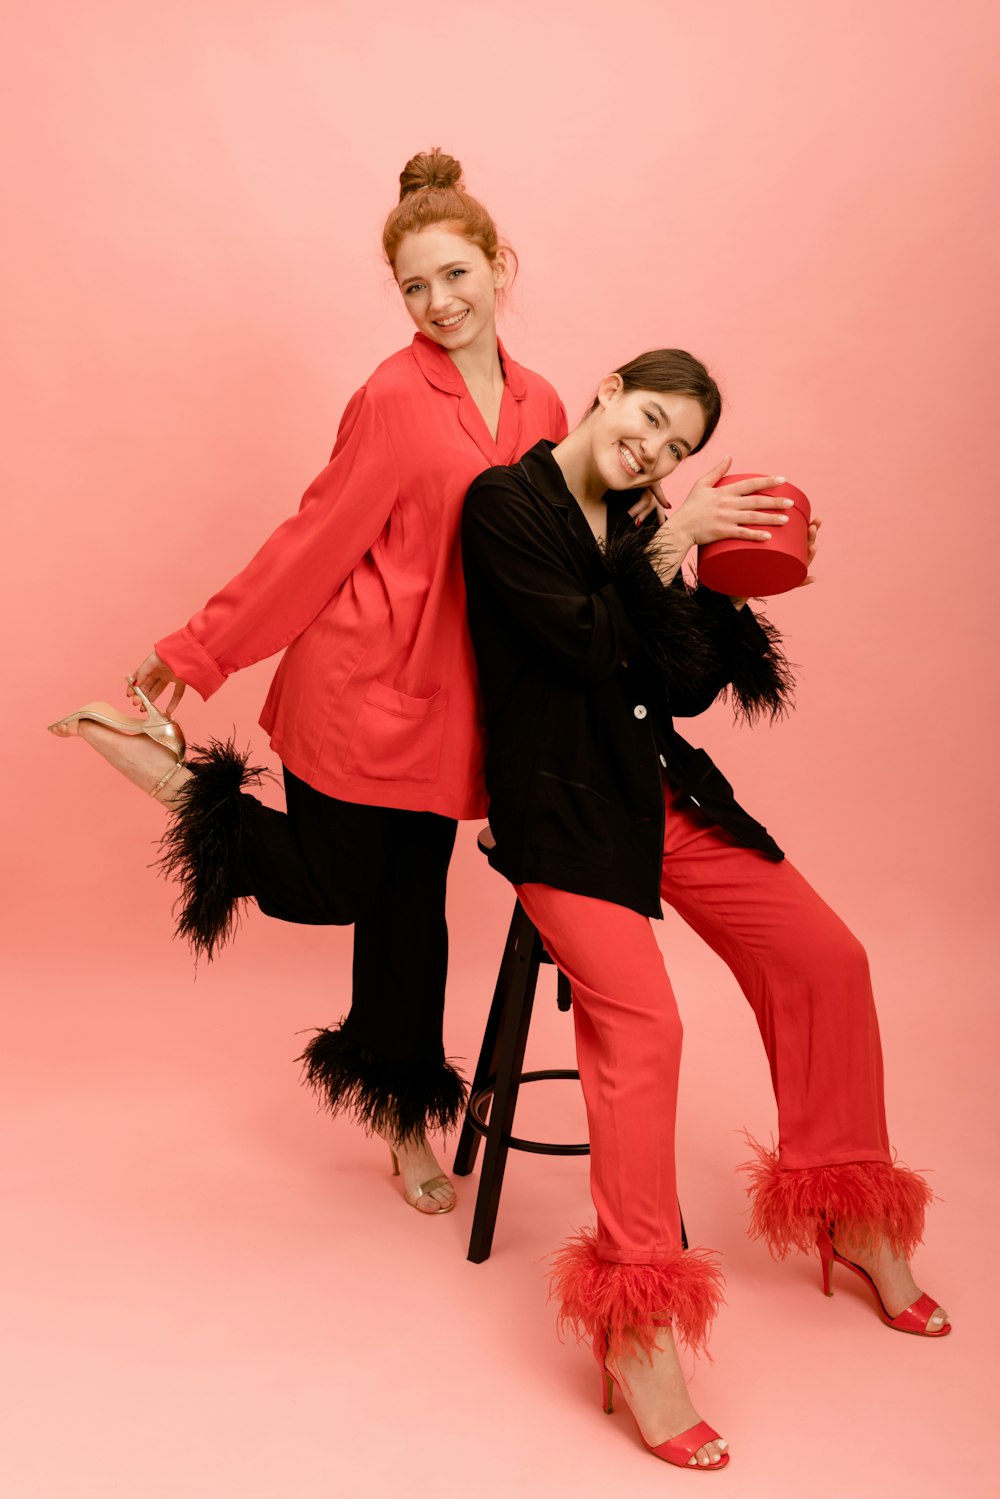 two women in red and black posing for a picture